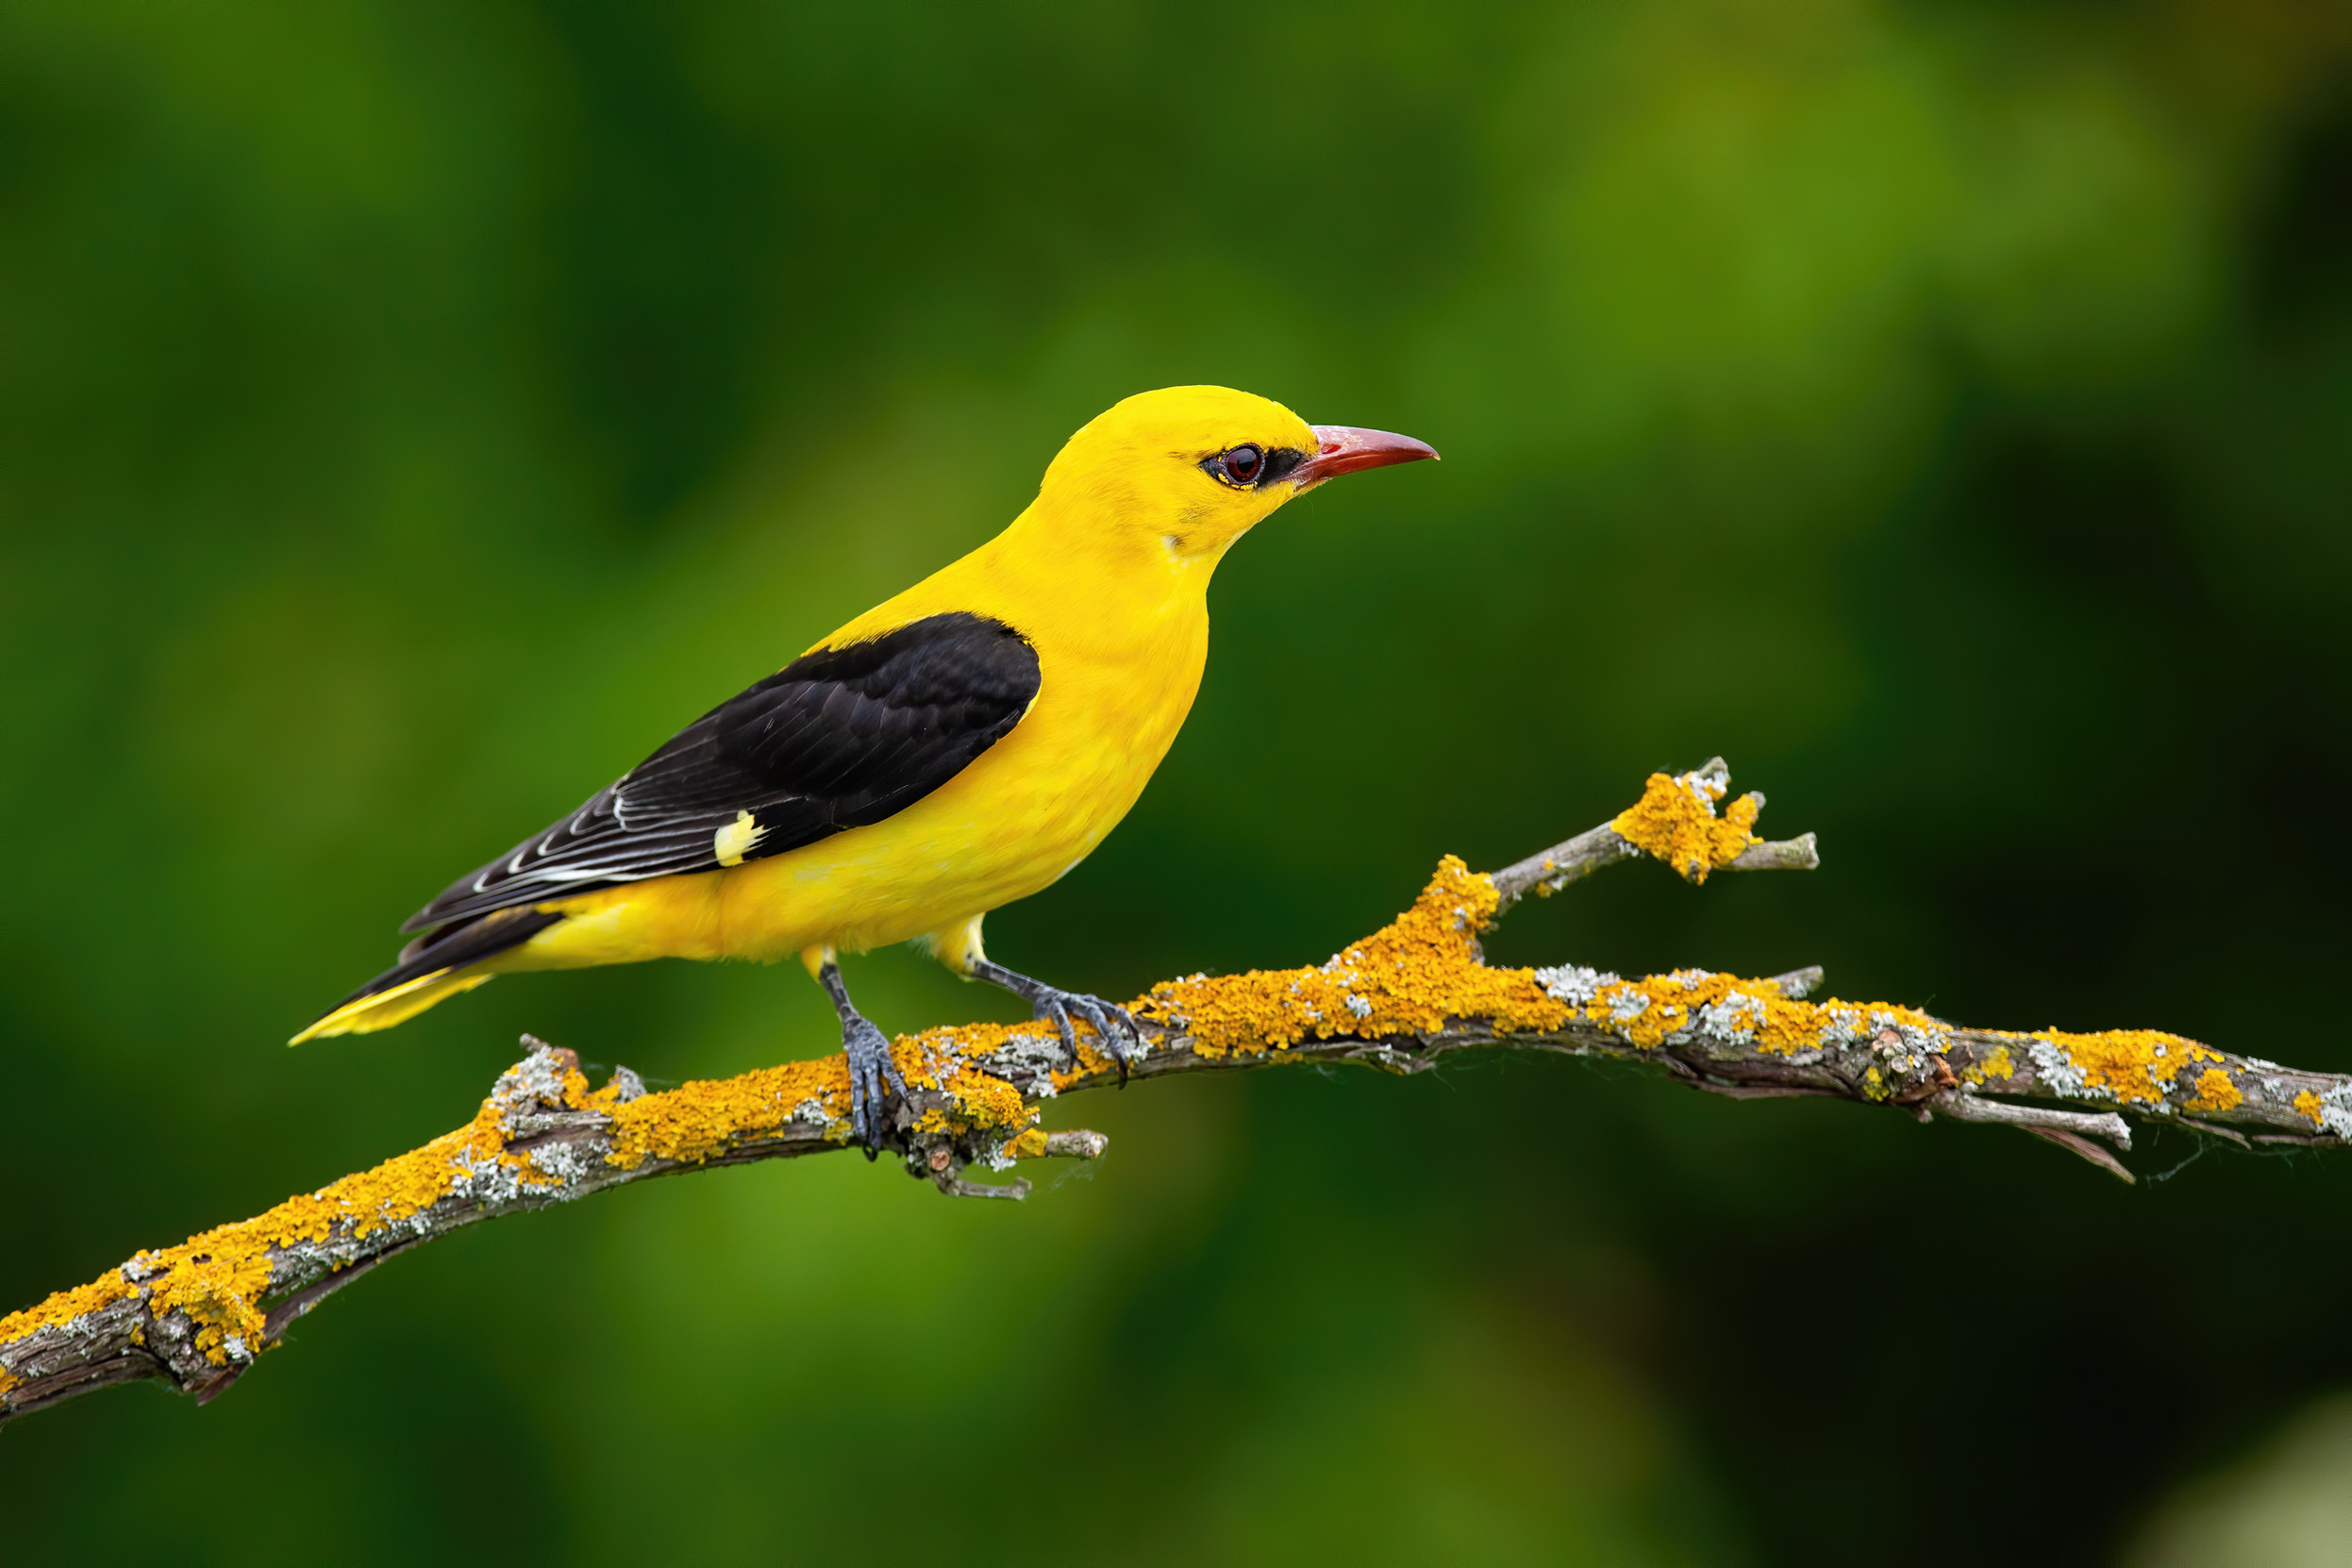 A male Golden Oriole perched on a branch covered in yellow moss.